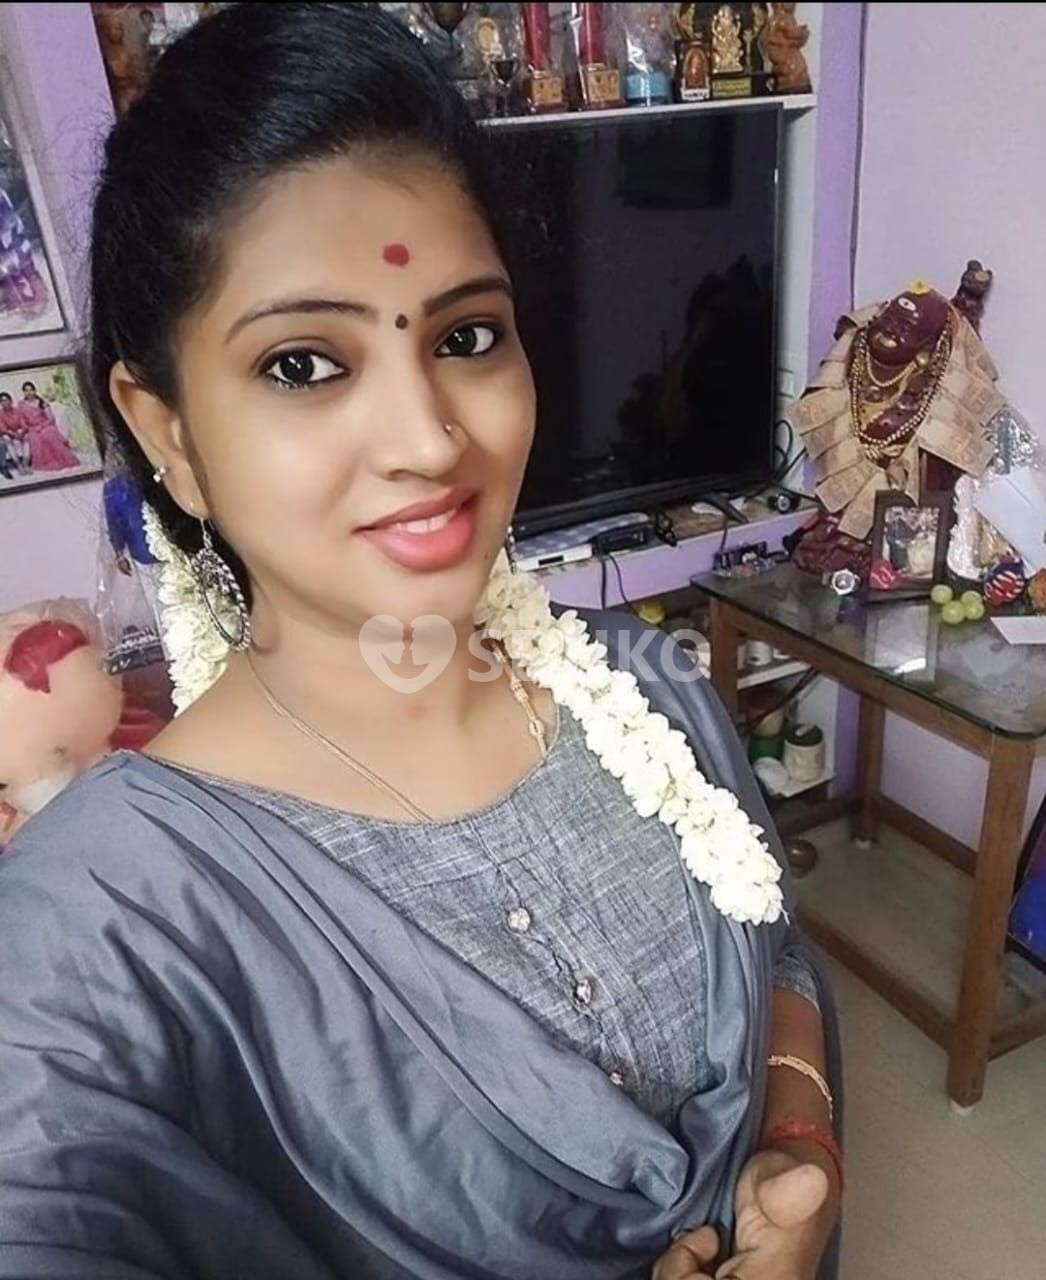 Chennai gys afortable price outcall incall available and call me book now